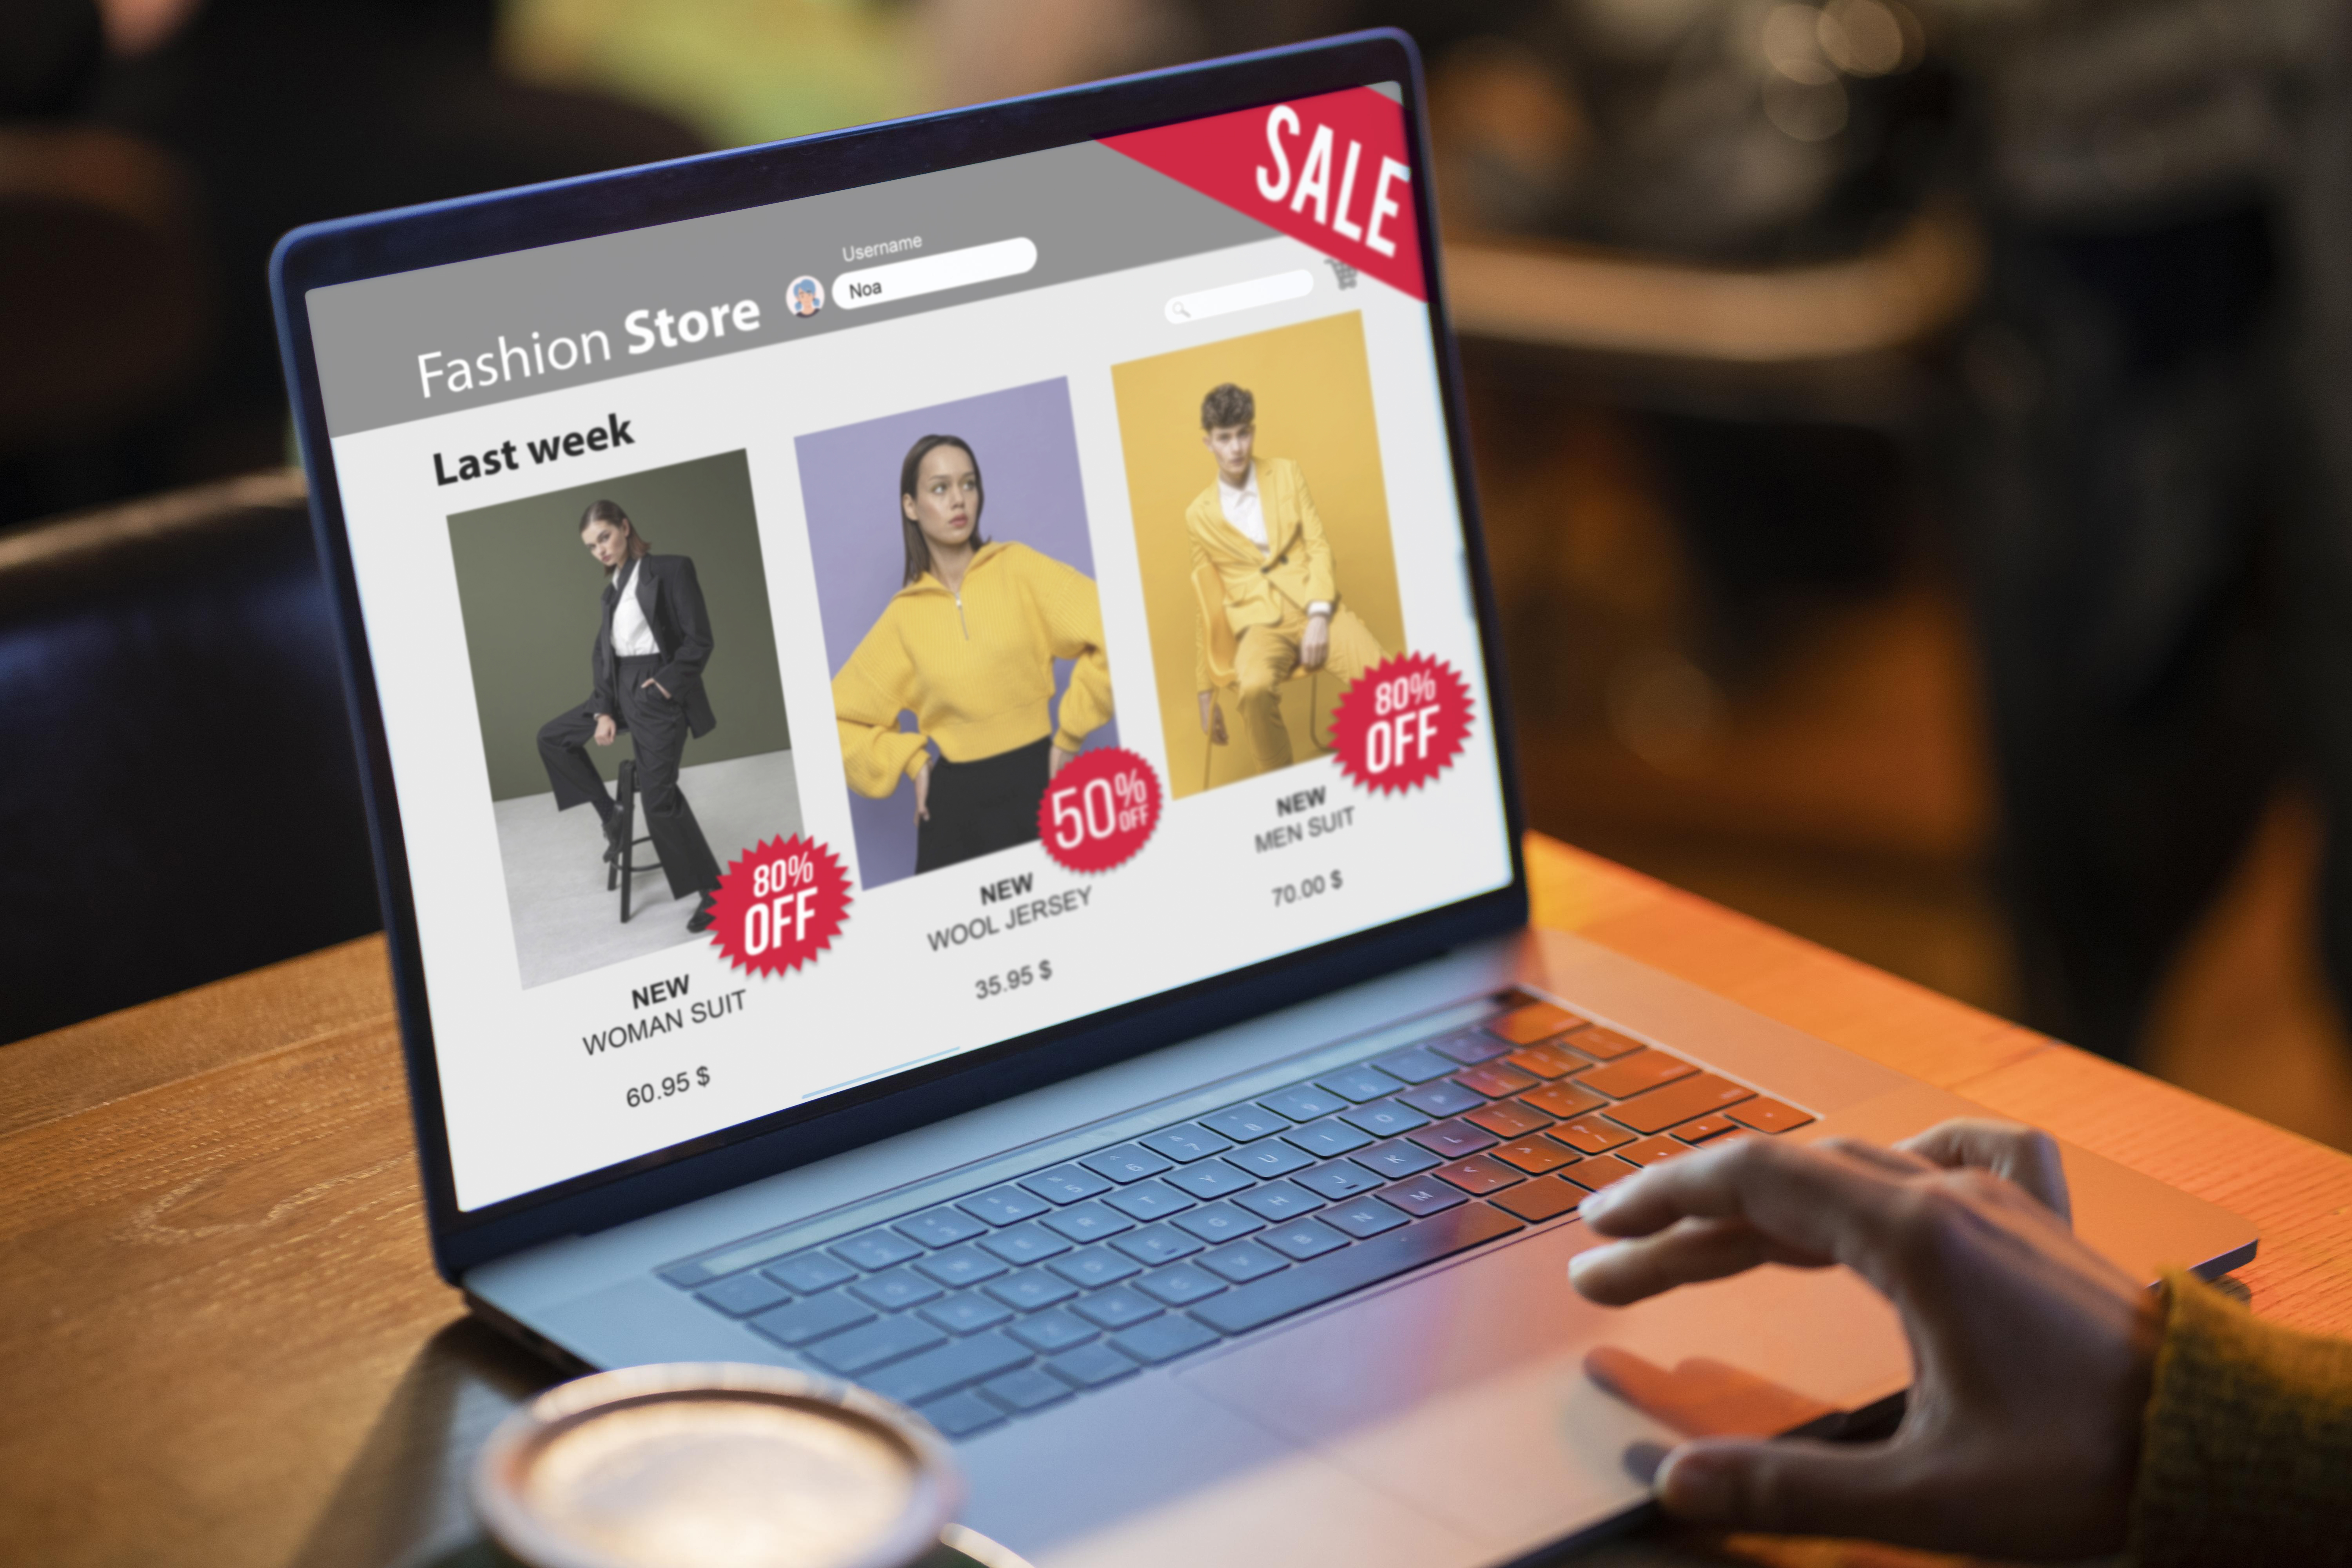 How to Optimise Your ecommerce Store for Increased Sales and Conversions